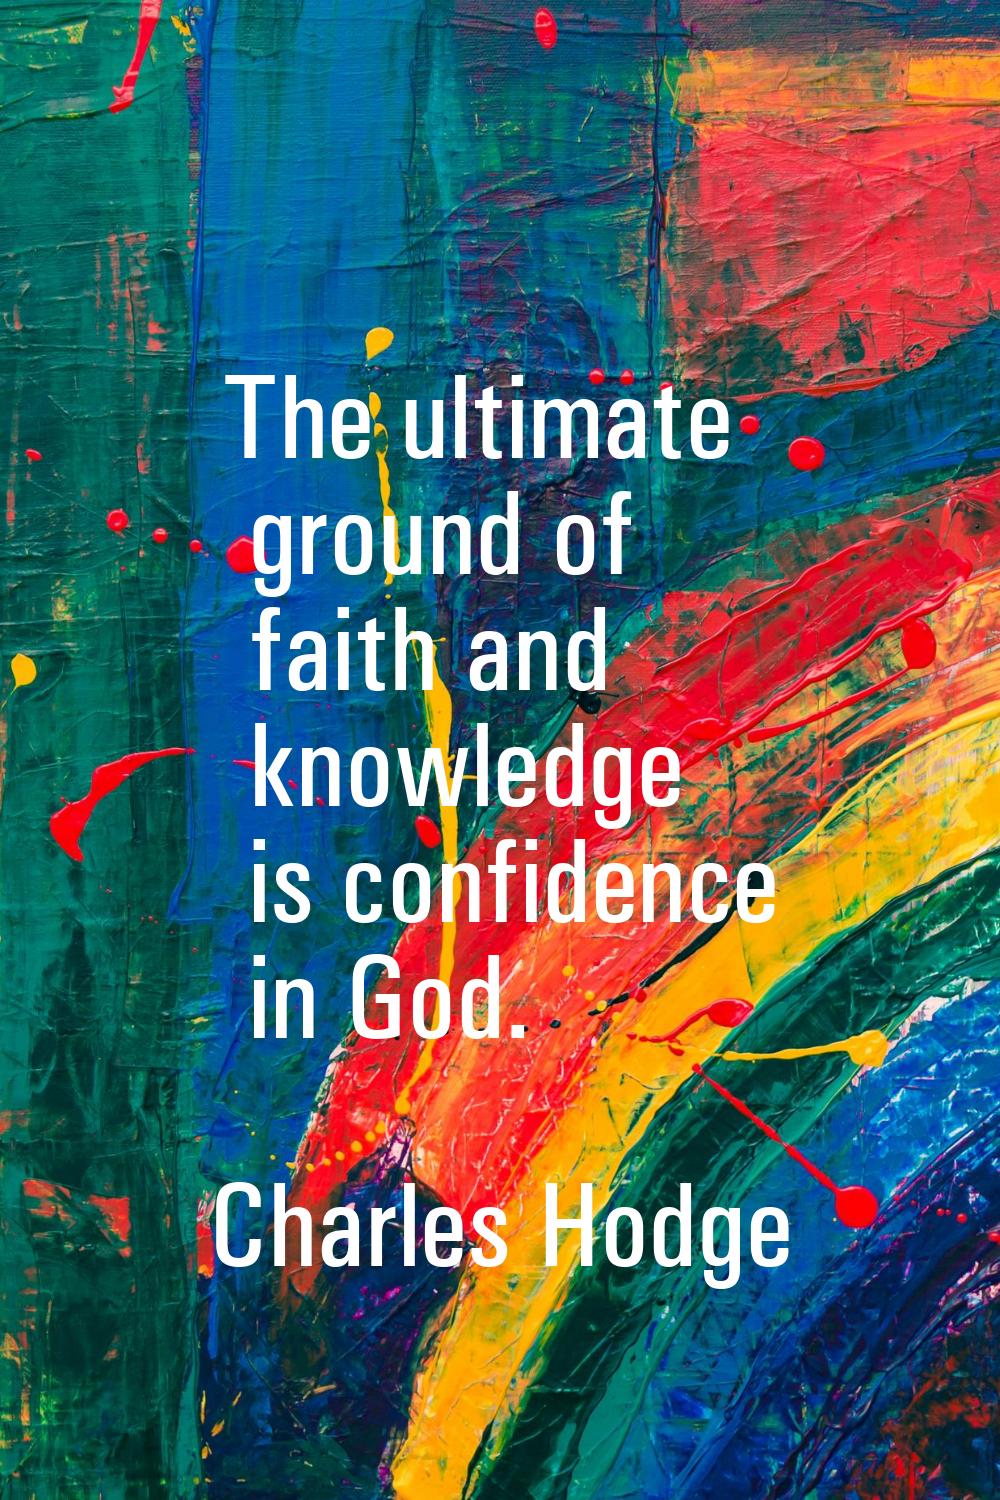 The ultimate ground of faith and knowledge is confidence in God.